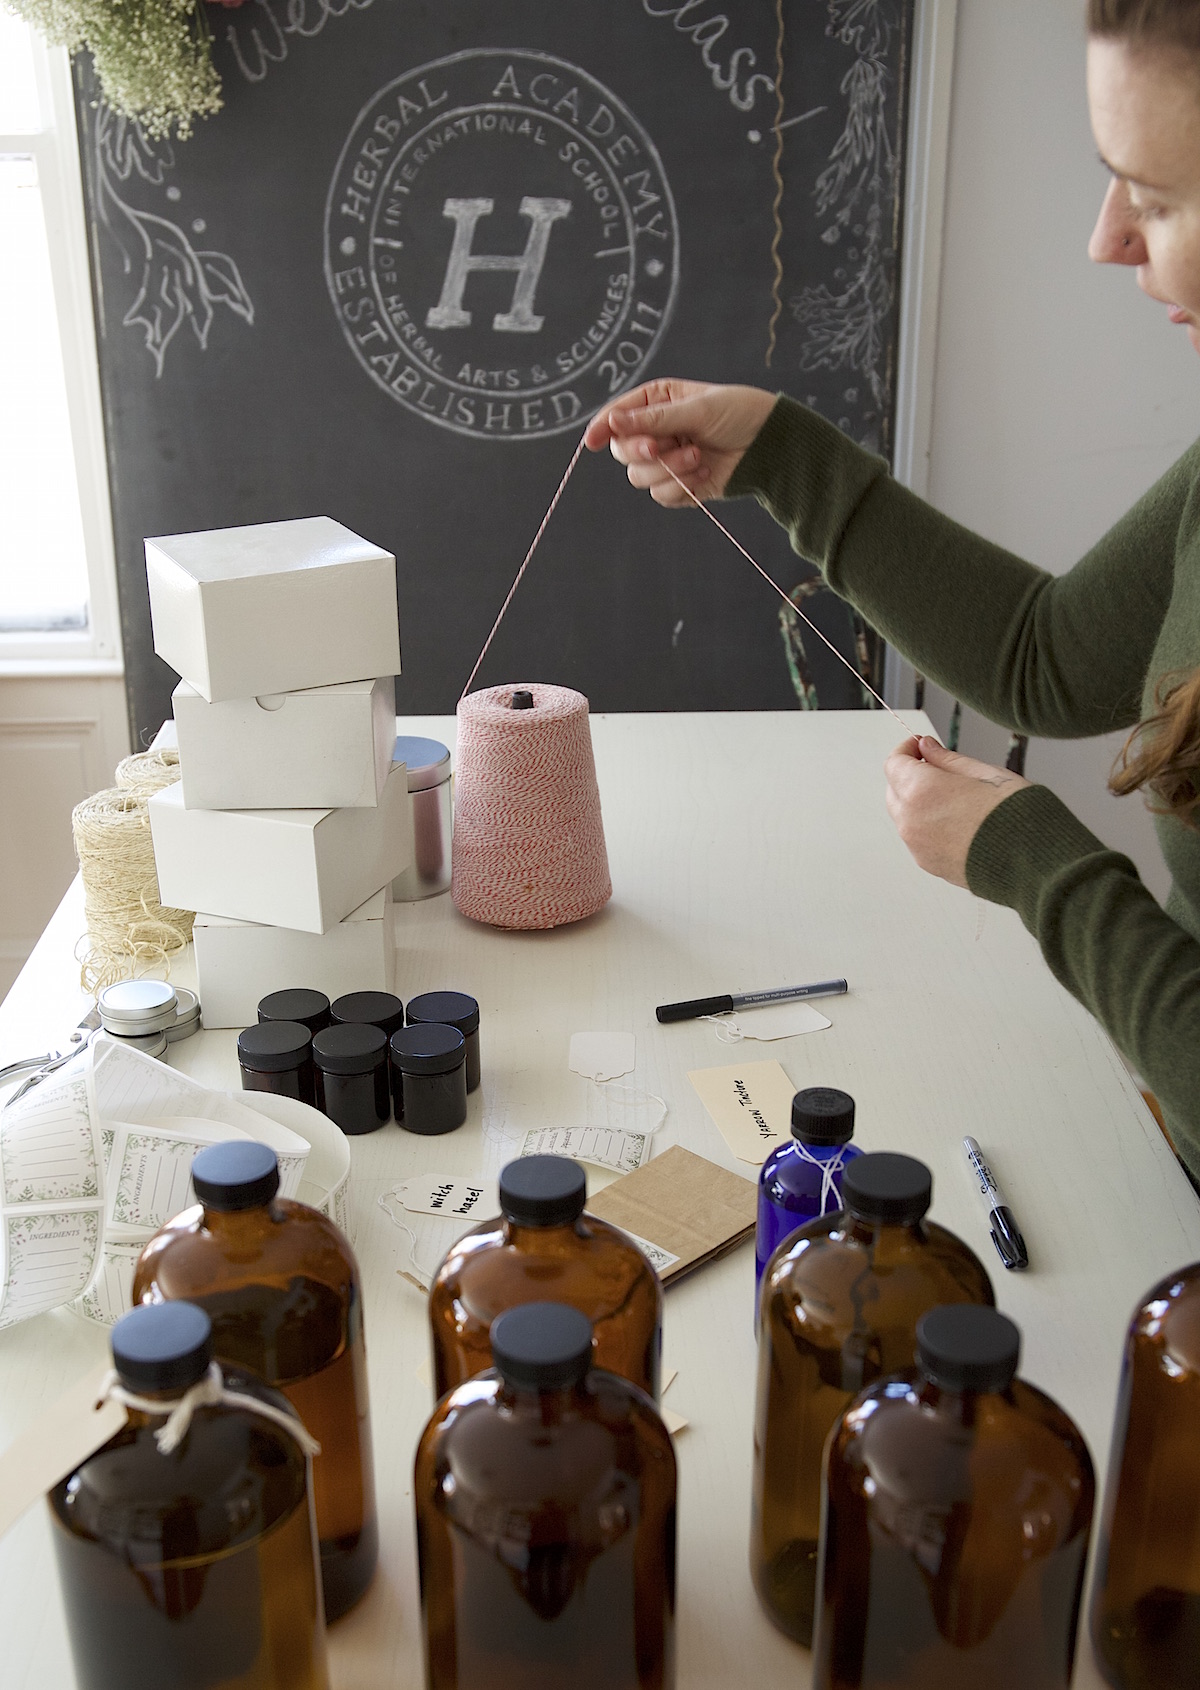 Can You Make A Career Out Of Herbalism? | Herbal Academy | If you’re curious to know if an herbal career is right for you, we’ll look at some various ways one can work as an Entrepreneur Herbalist in this course.